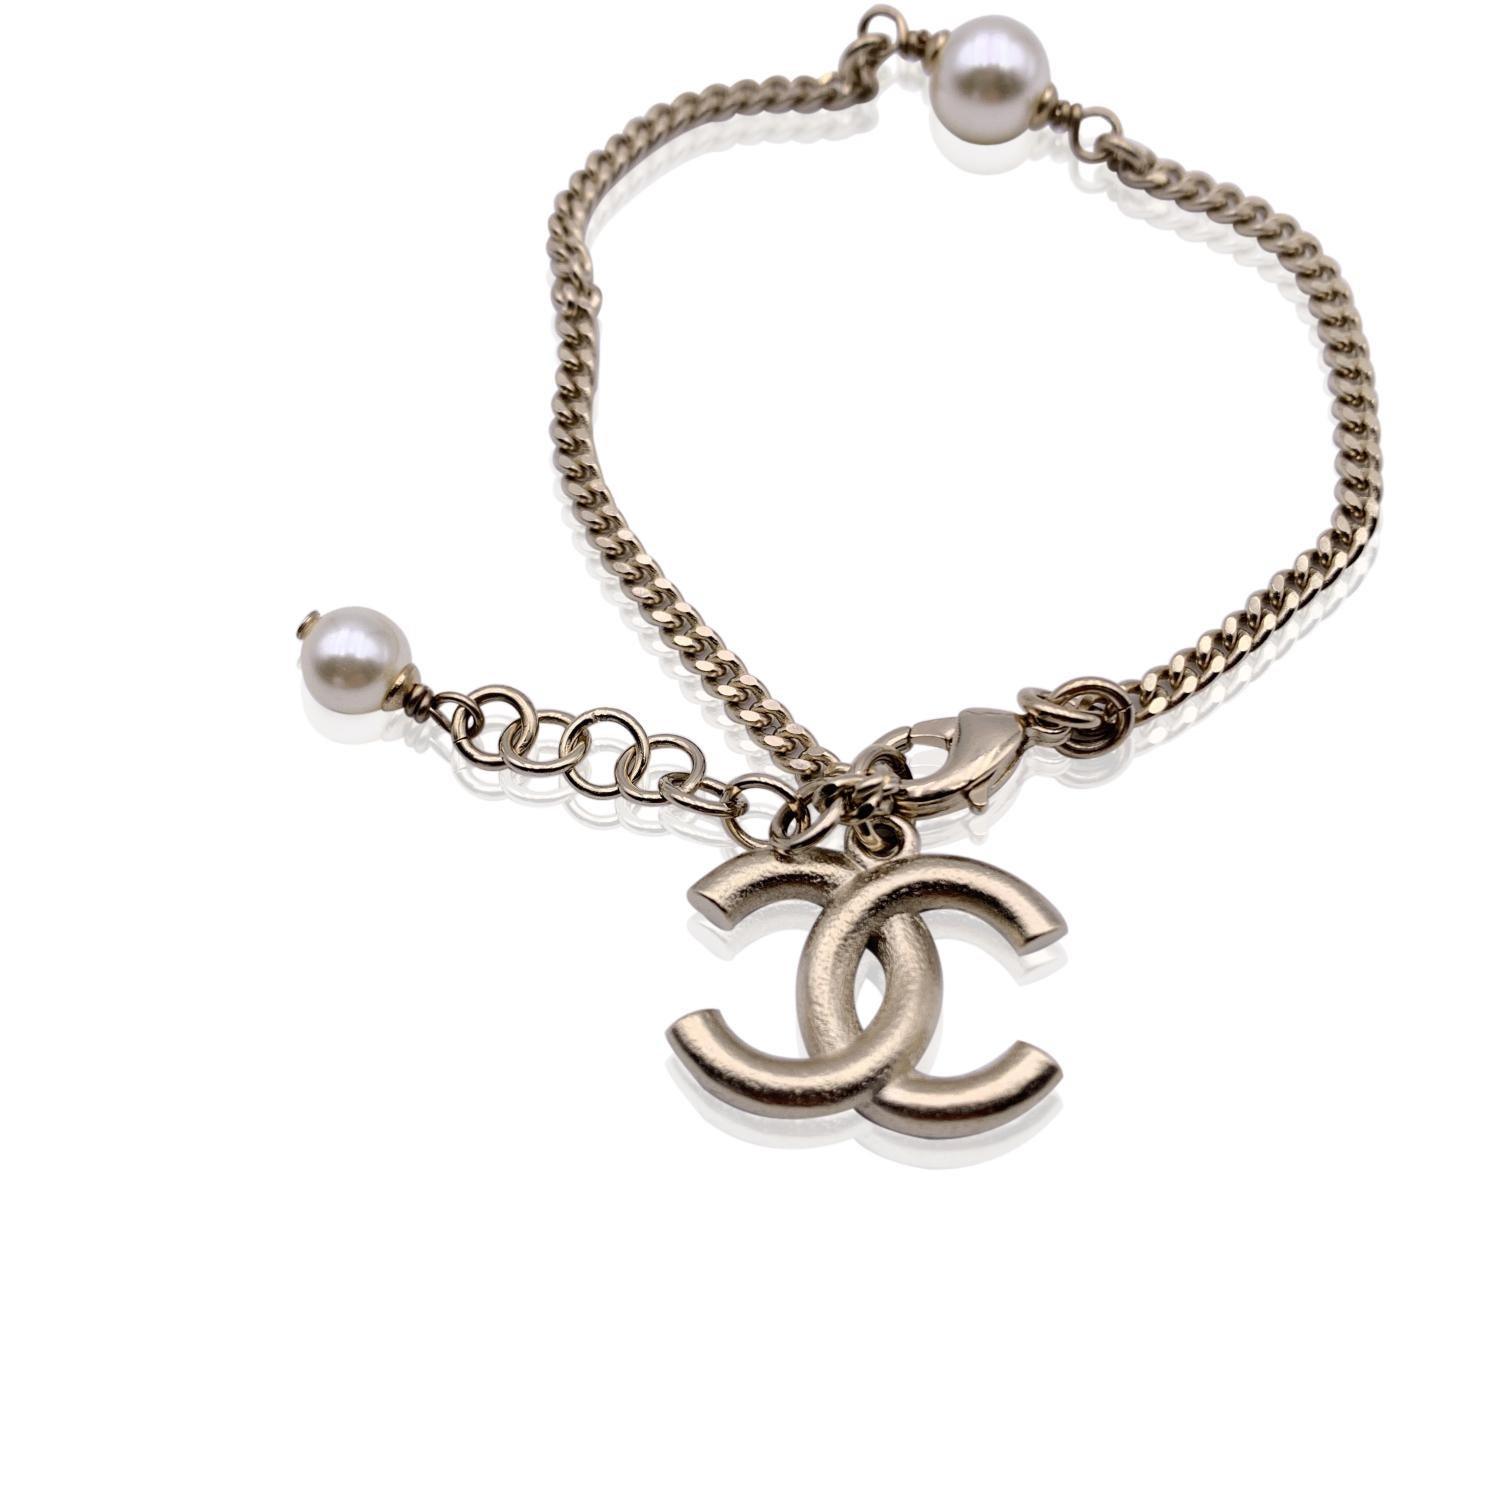 Lovely light gold metal chain bracelet with enameled CC logo charm in black and red, by CHANEL from the 2018/2019 collection. 2 small faux pearls accents. Lobster closure. Marked 'Chanel C18 CC A made in France' on the closure Total lenght: 7.5